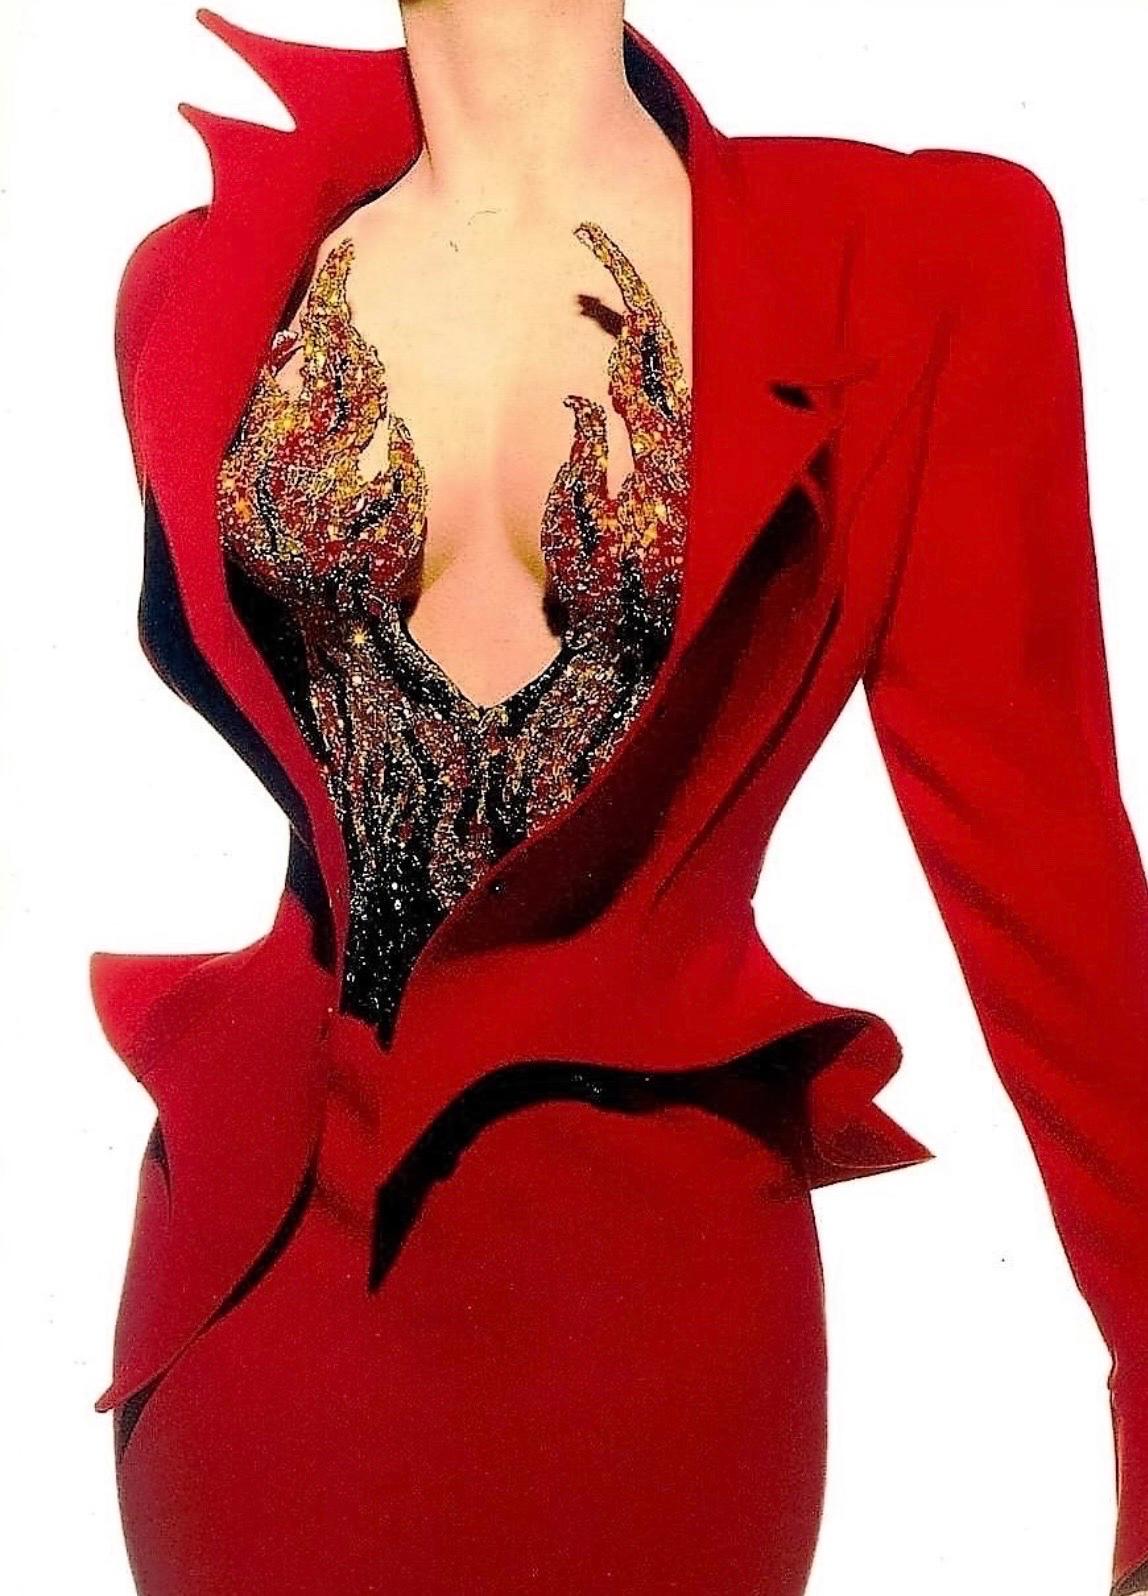 Own a piece of fashion history with this iconic documented Thierry Mugler jacket from the collectible Fall Winter 1988 